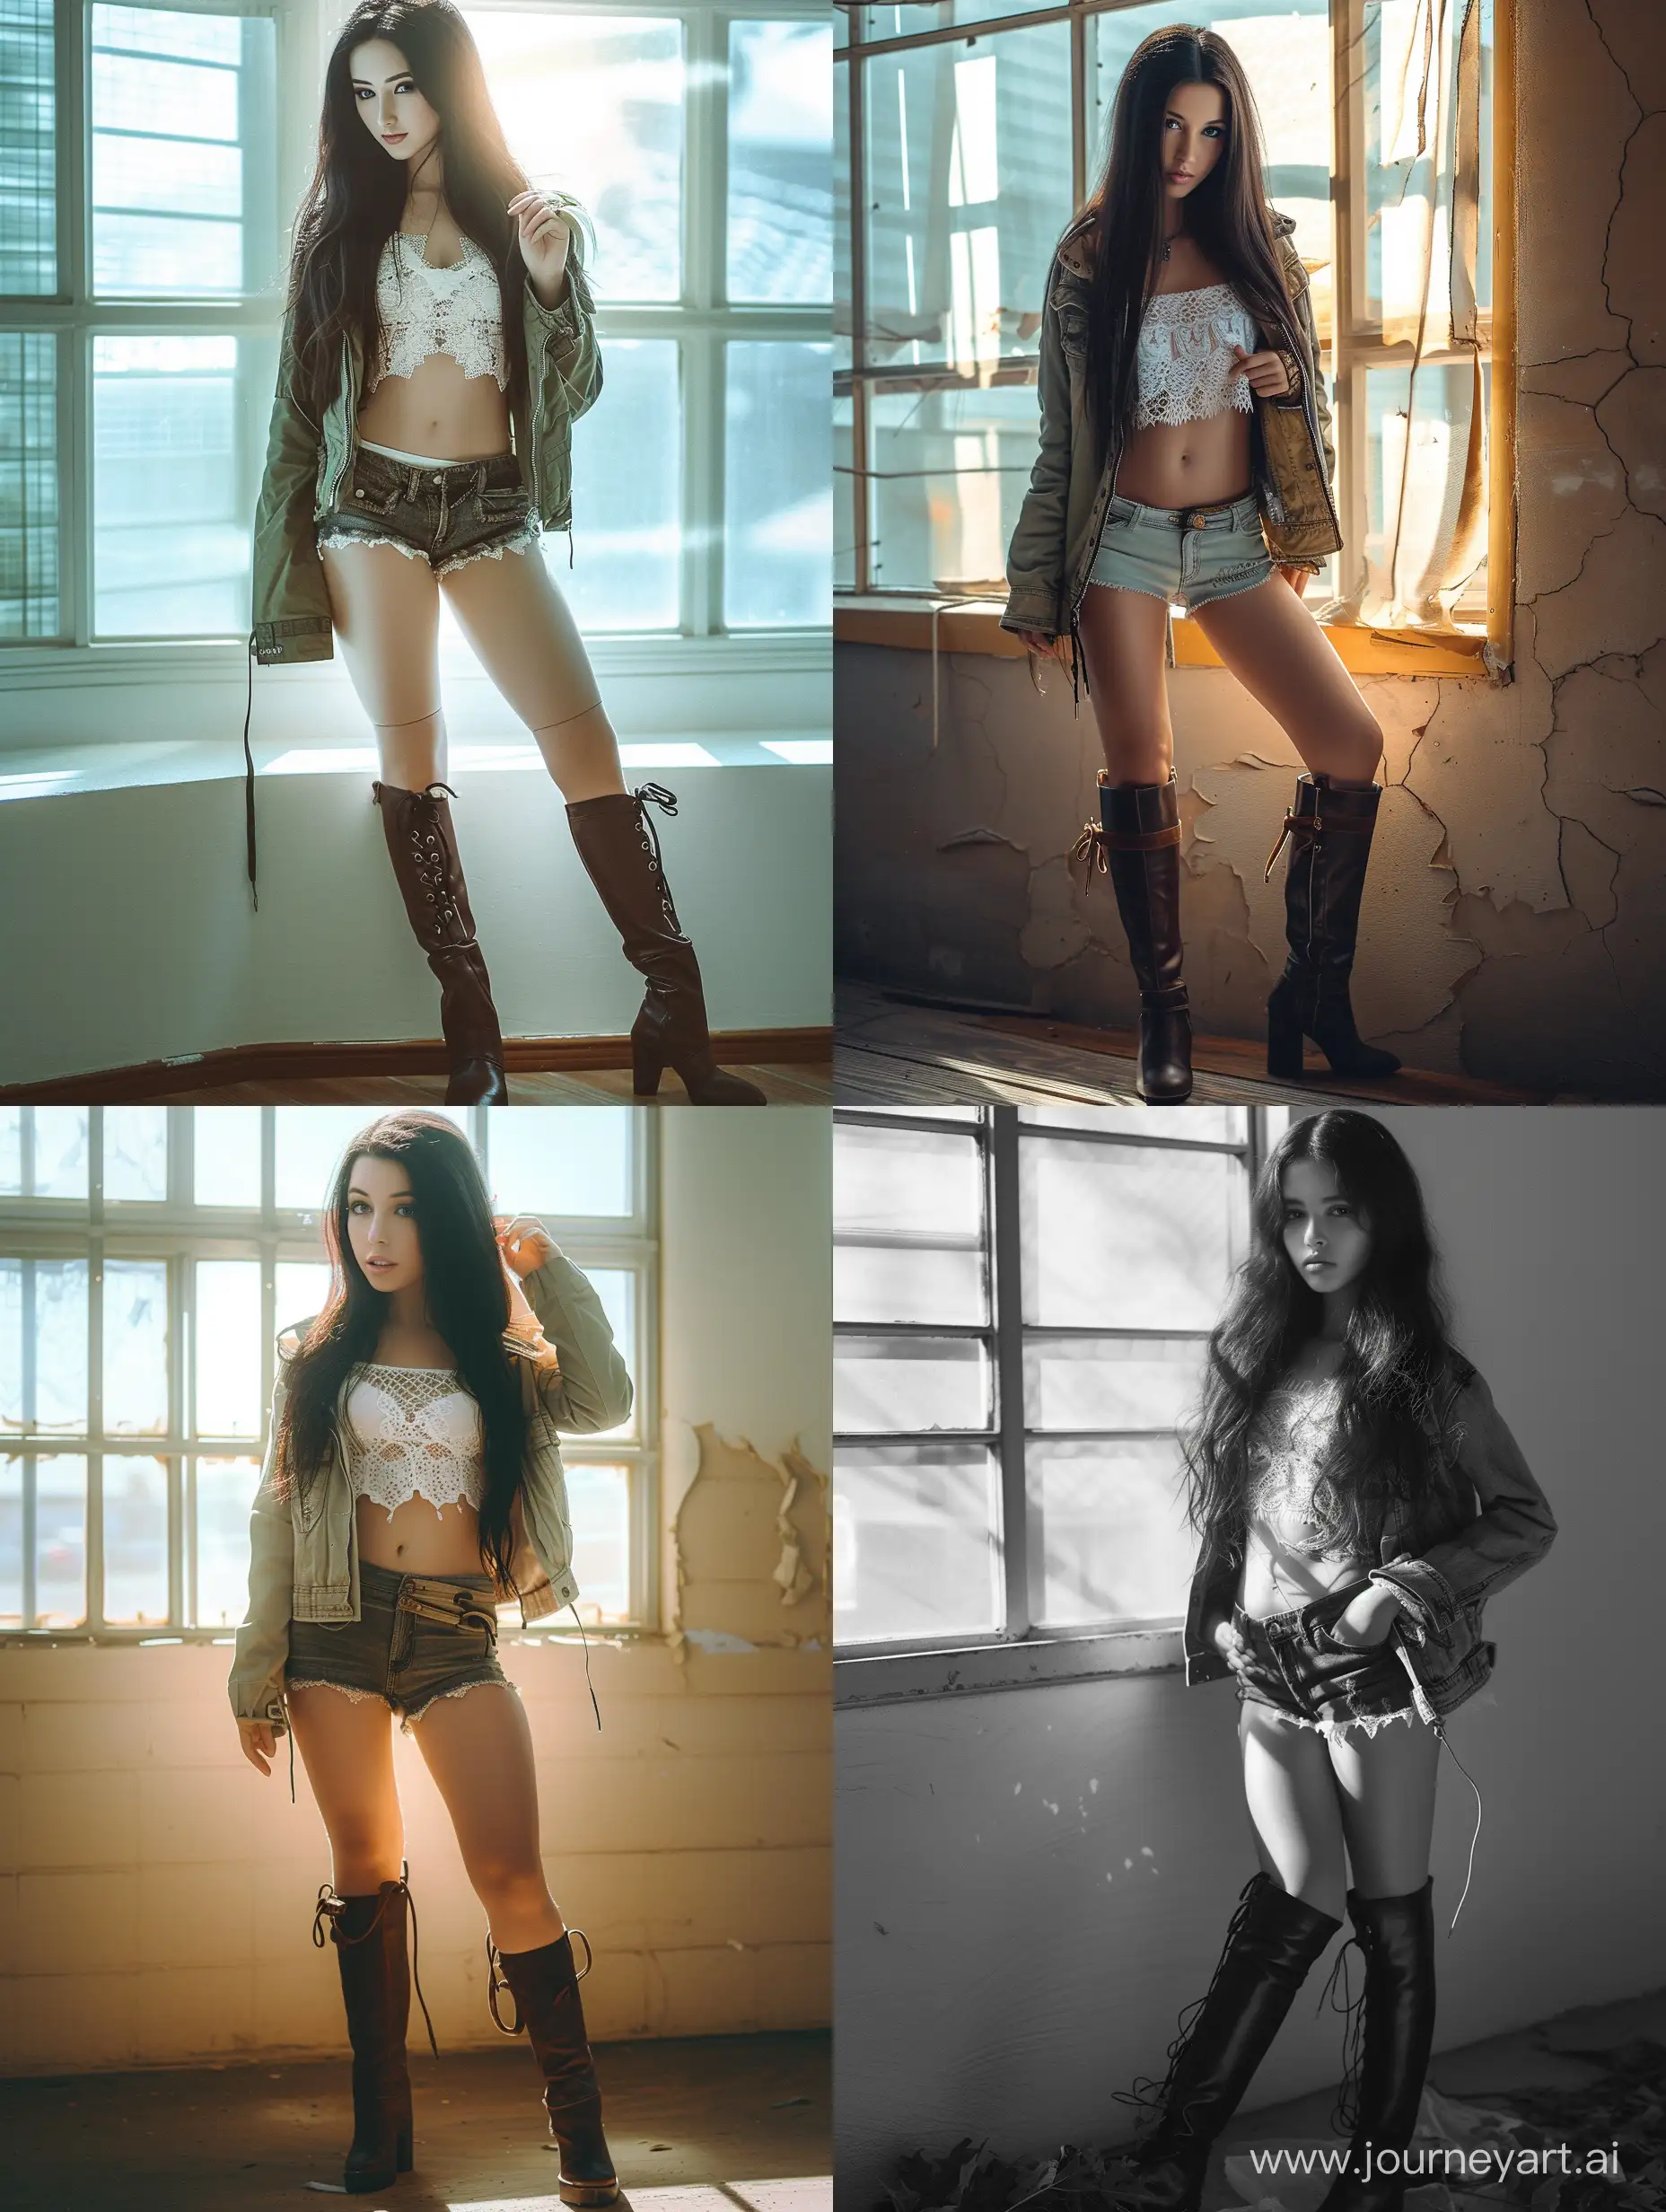 Stylish-Young-Woman-in-KneeHigh-Boots-and-Lace-Top-at-Sunlit-Photo-Studio